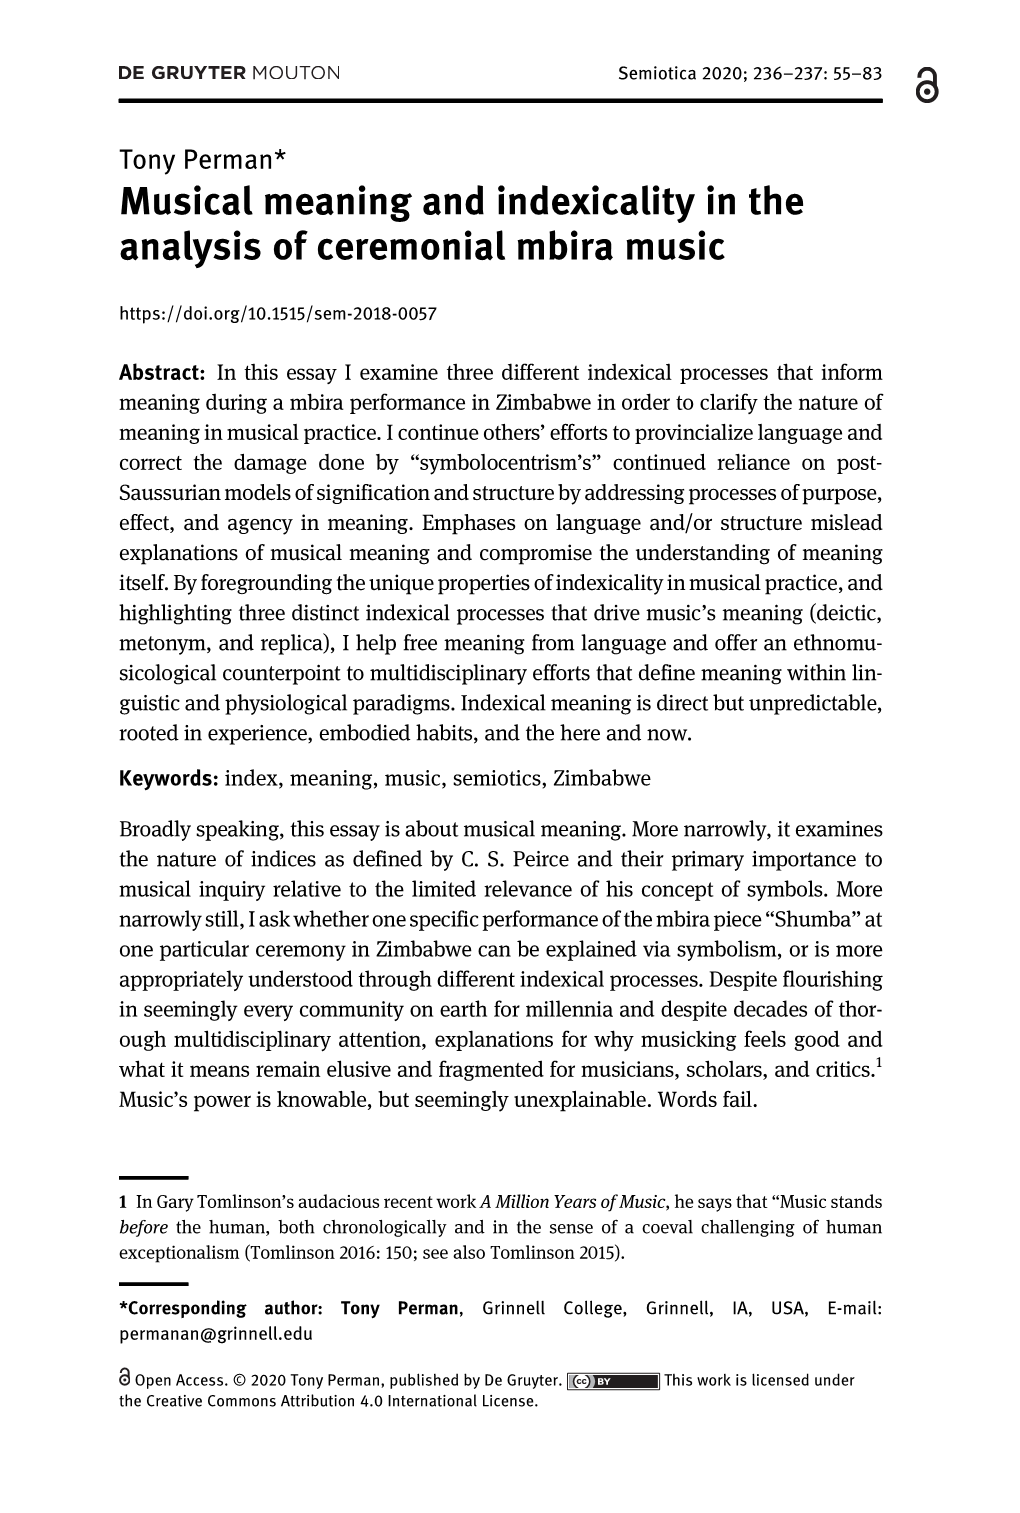 Musical Meaning and Indexicality in the Analysis of Ceremonial Mbira Music